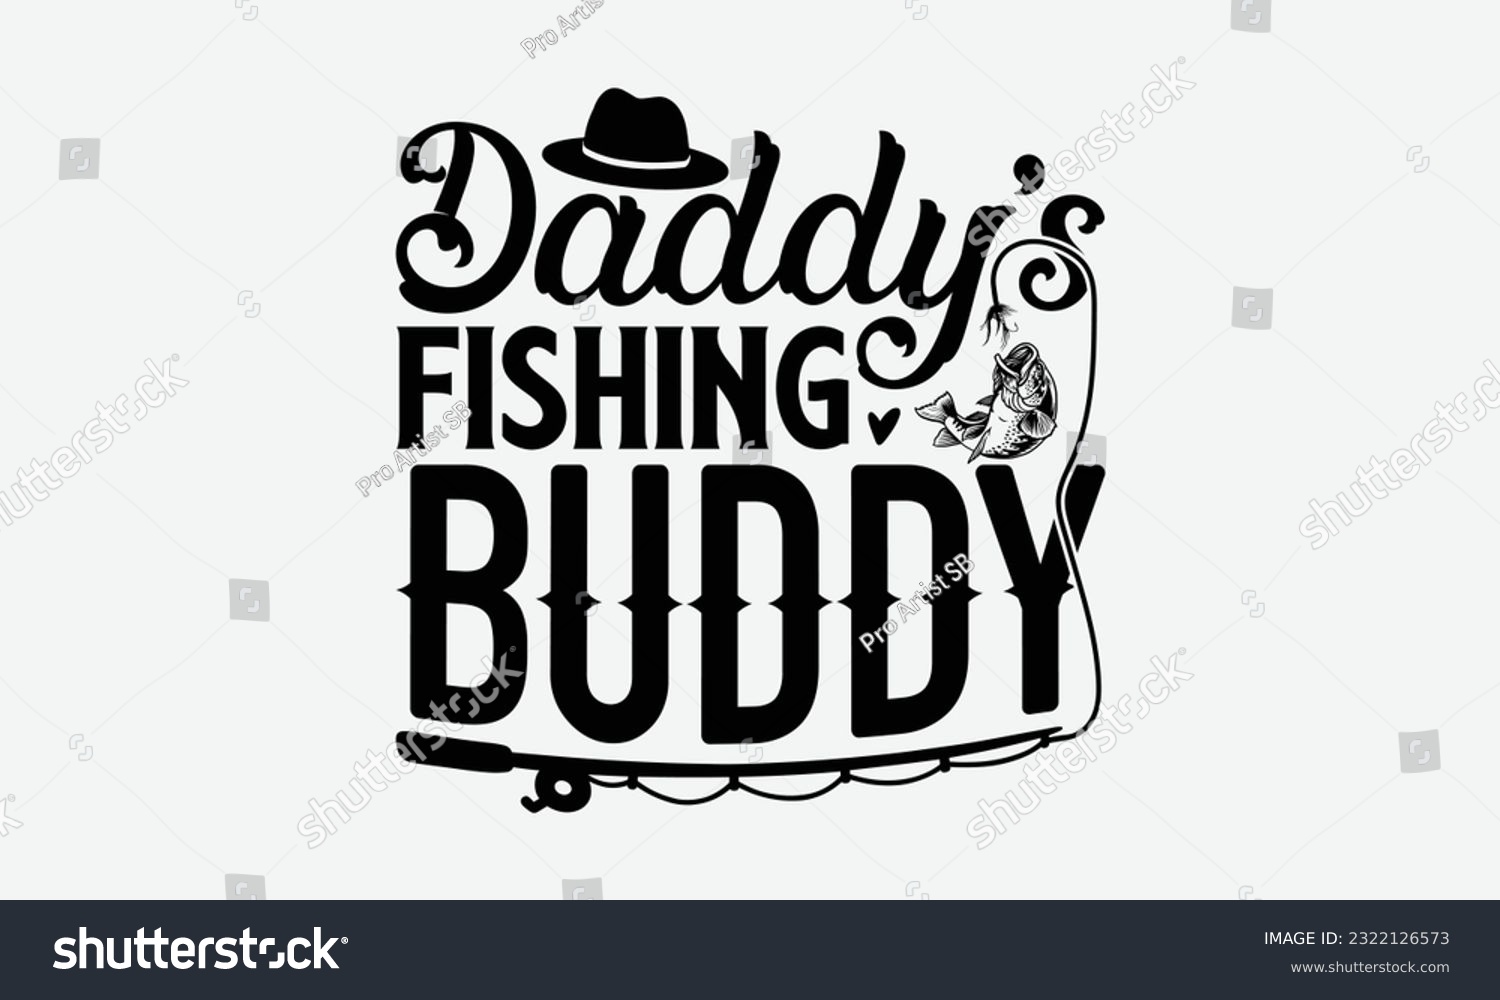 SVG of Daddy’s Fishing Buddy - Fishing SVG Design, Fisherman Quotes, Hand Written Vector T-shirt Design, For Prints on Mugs and Bags, Posters. svg